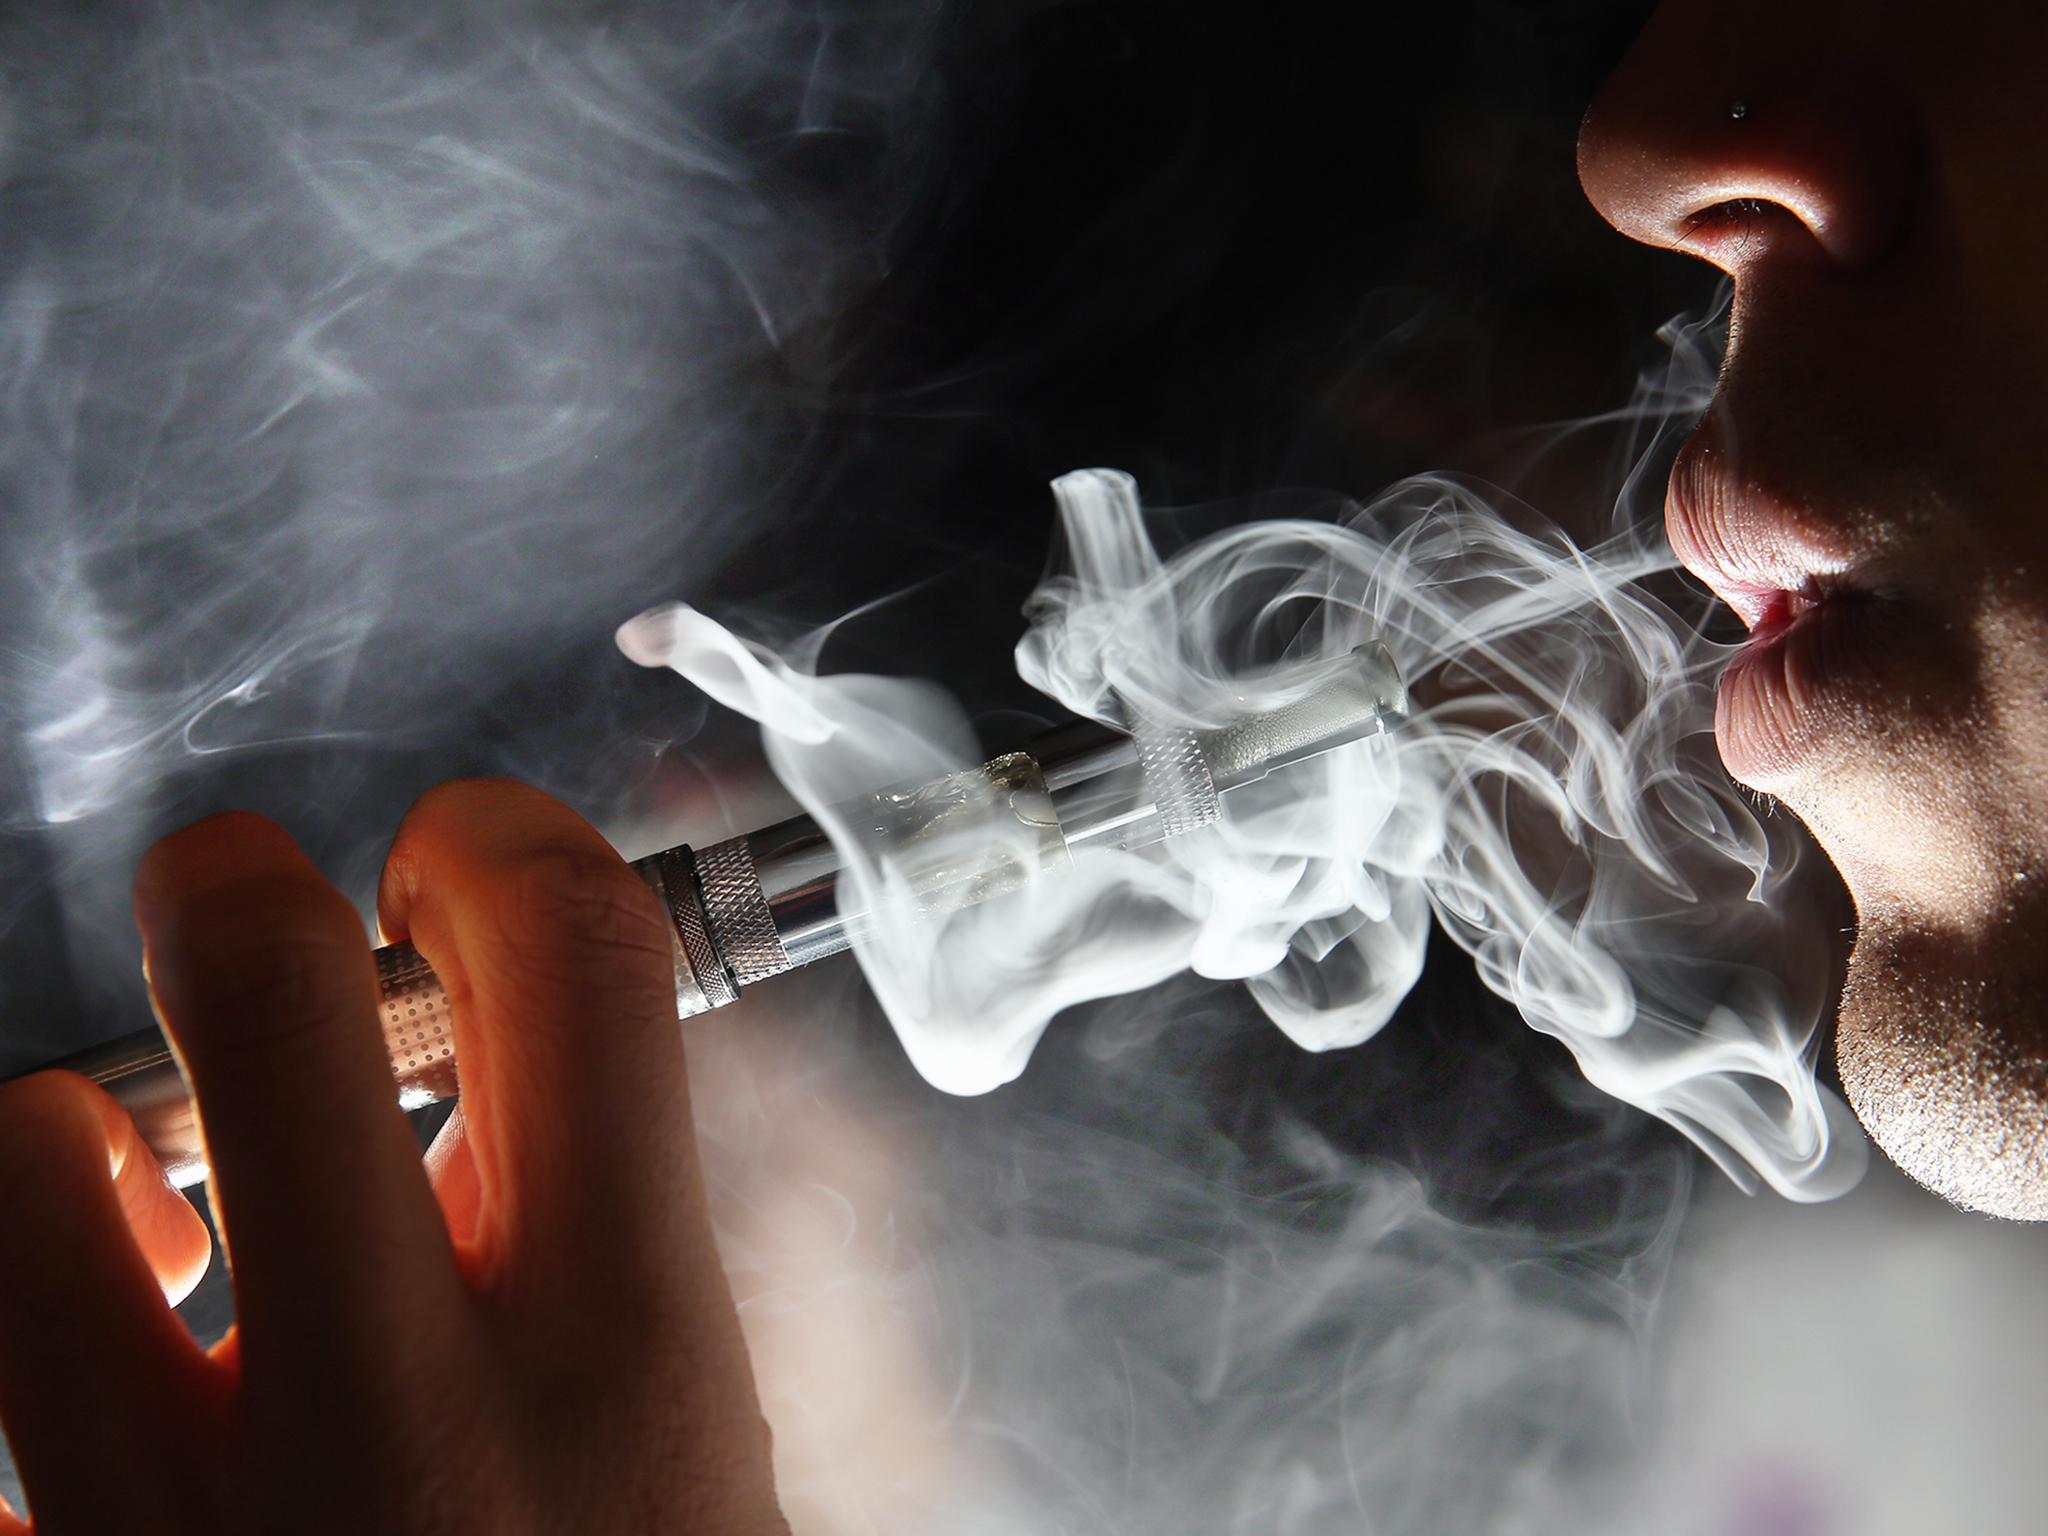 Vaping in public is not the same as smoking in public, Health officals insists